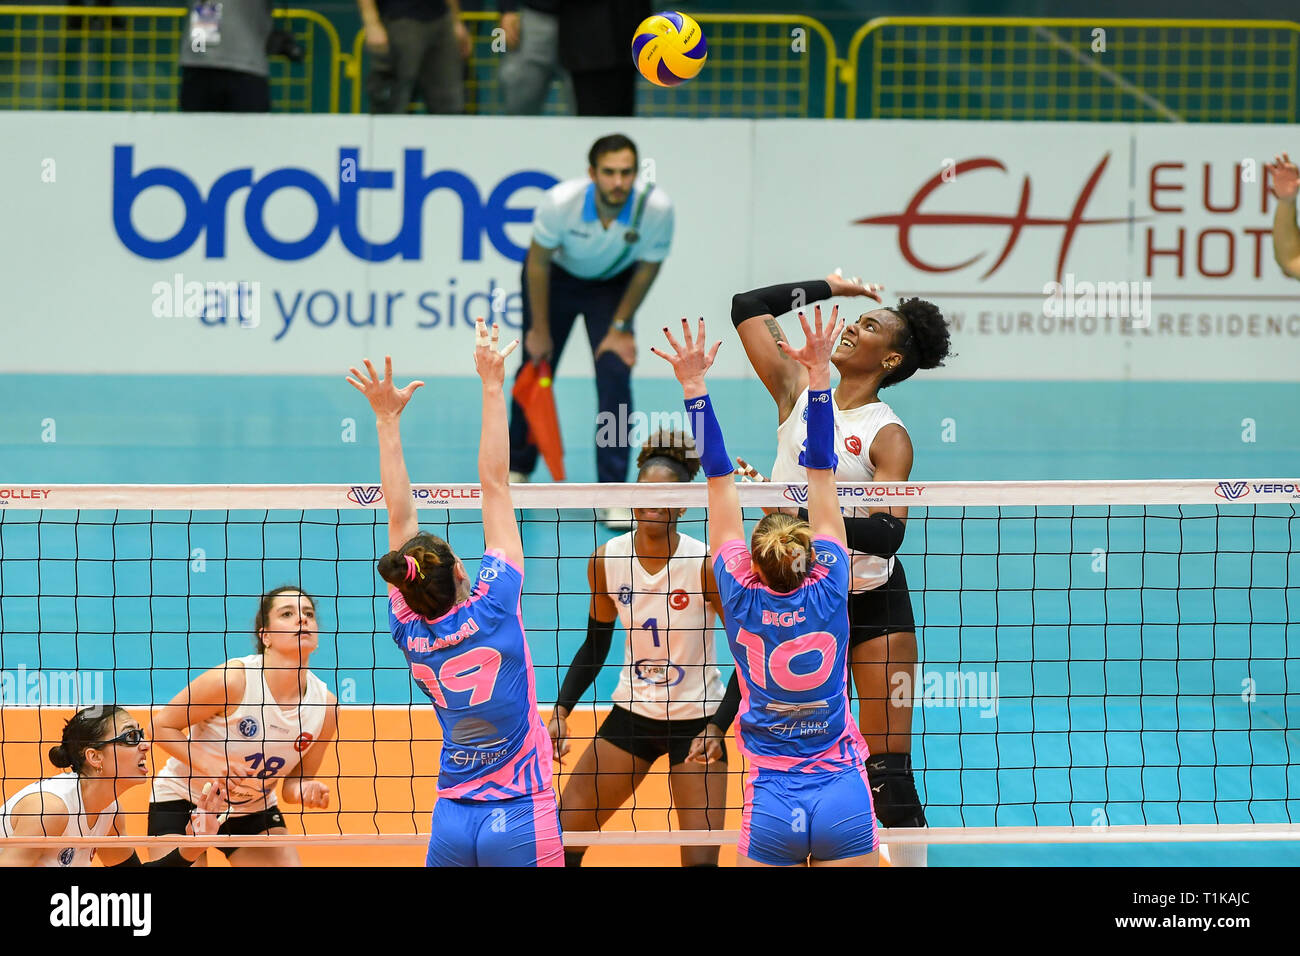 Candy Arena, Monza, Italy. 27th March, 2019. CEV Volleyball Challenge Cup women, Final, 2nd leg. Brayelin Elizabeth Martinez of Aydin BBSK during the match between Saugella Monza and Aydin BBSK at the Candy Arena Italy.  Credit: Claudio Grassi/Alamy Live News Stock Photo